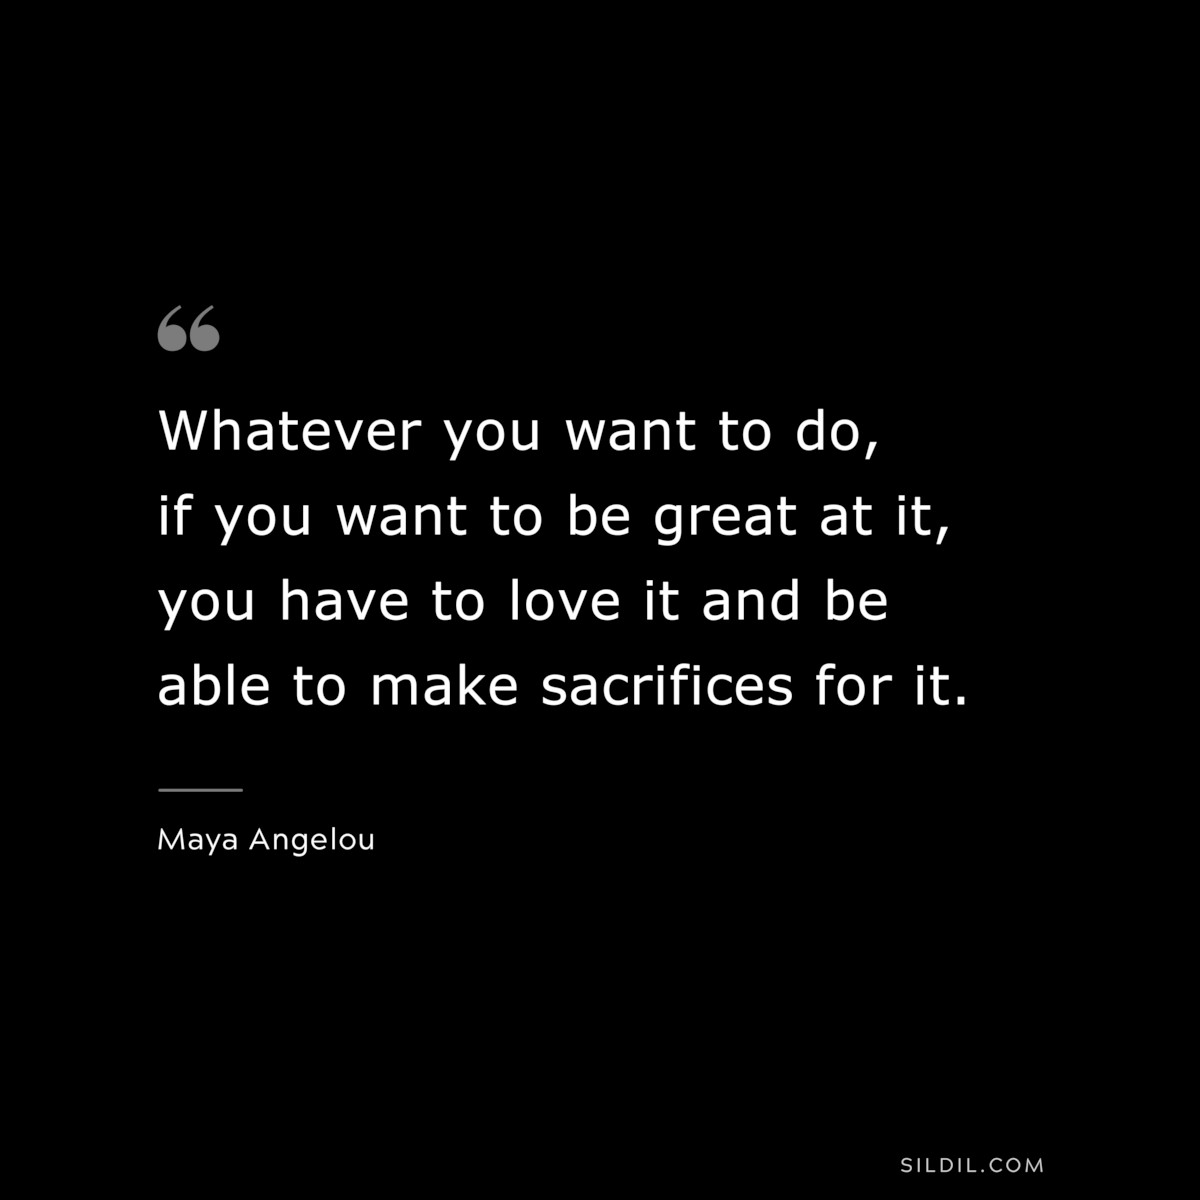 Whatever you want to do, if you want to be great at it, you have to love it and be able to make sacrifices for it. ― Maya Angelou